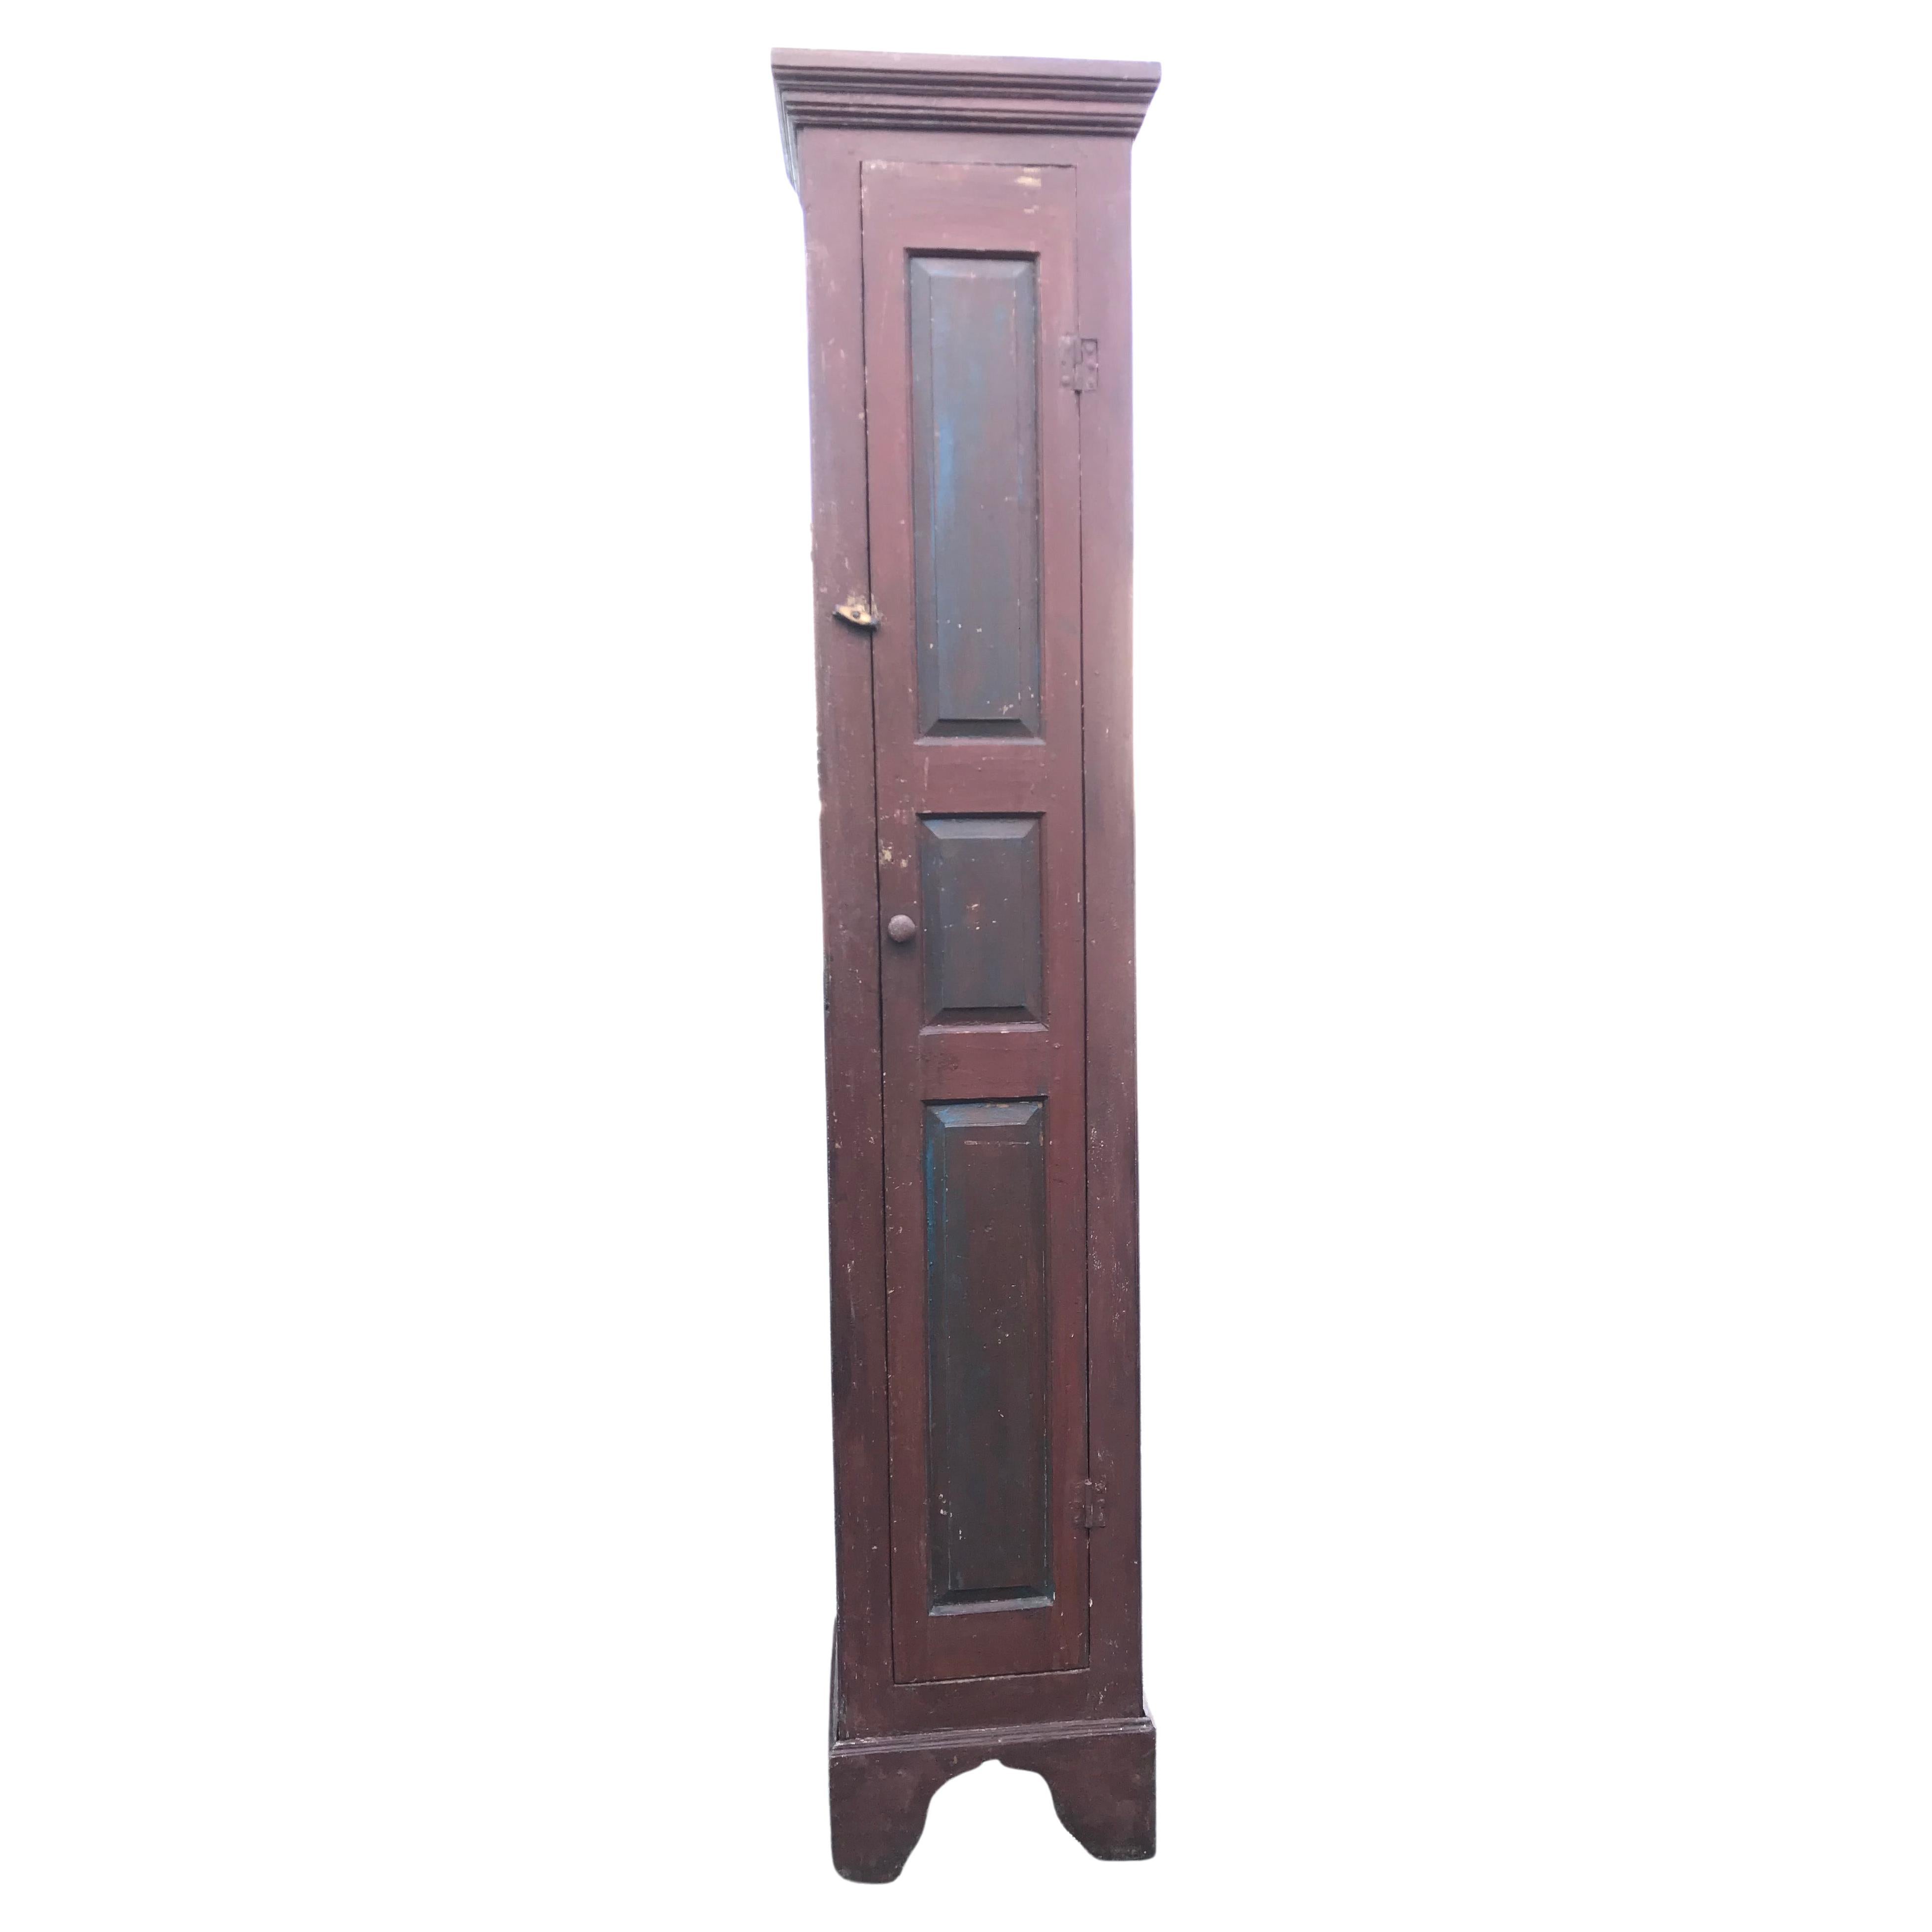 19th Century Narrow "Chimney Cupboard" in Old Red Paint